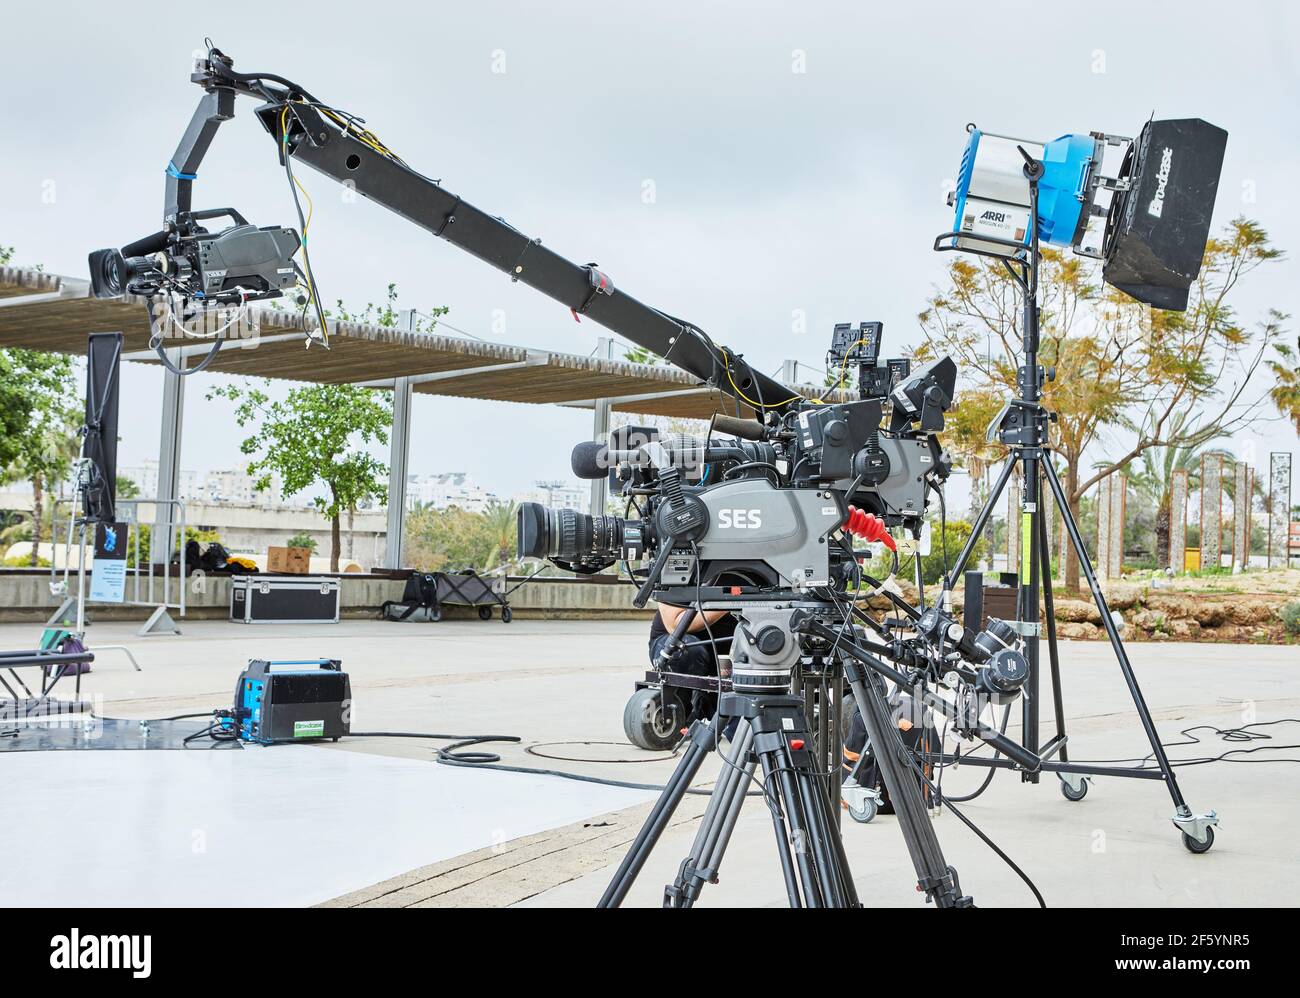 Professional Equipment For Filming Tv Shows And Films A Video Camera On Stand And Lighting Device Stock Photo Alamy